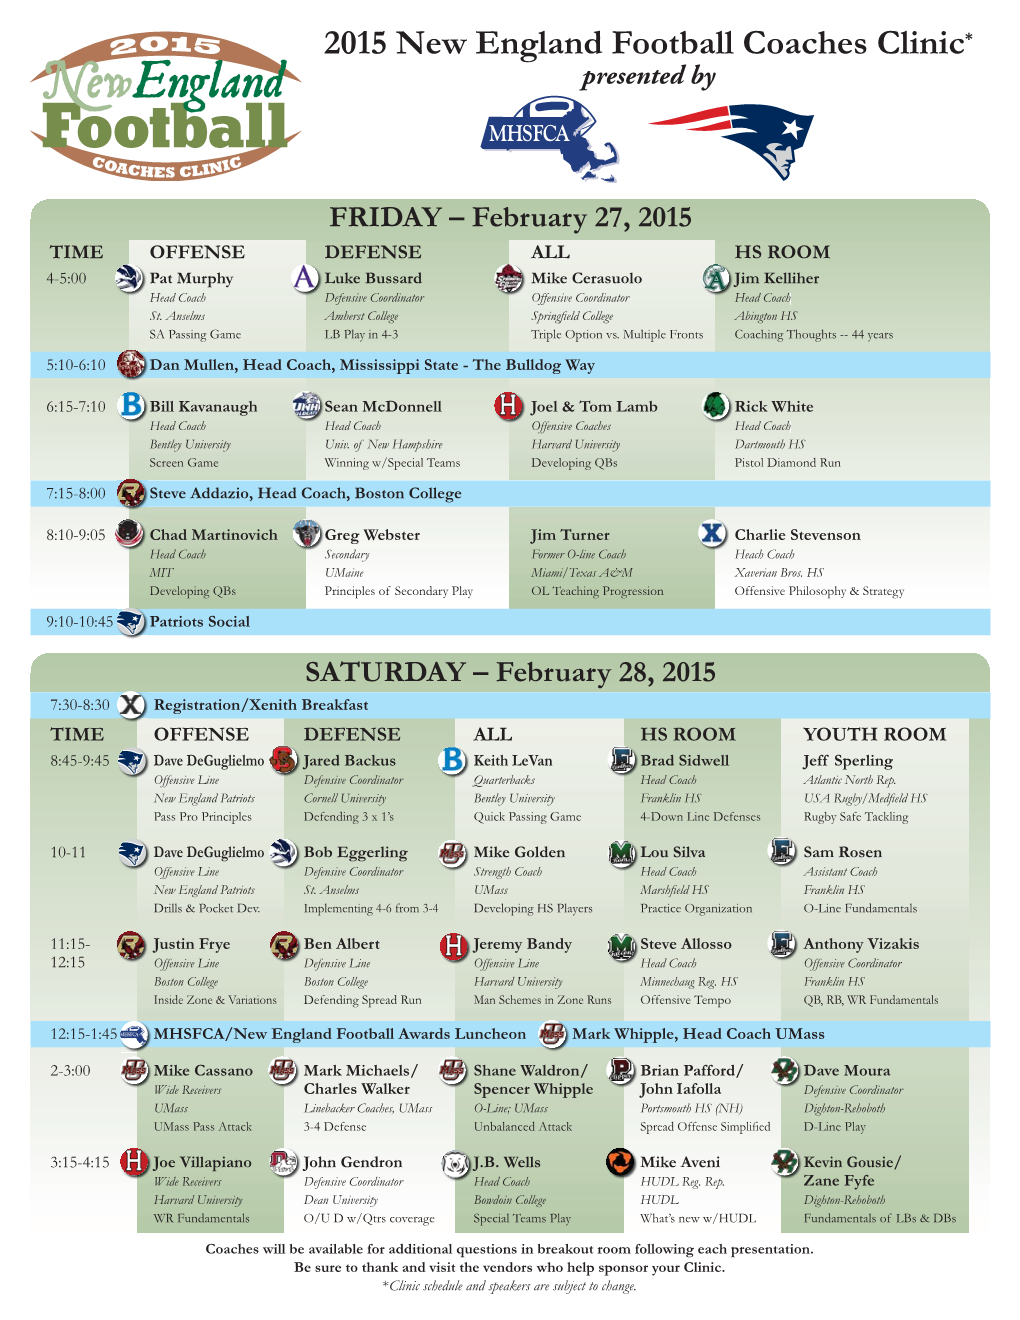 2015 New England Football Coaches Clinic* Presented By